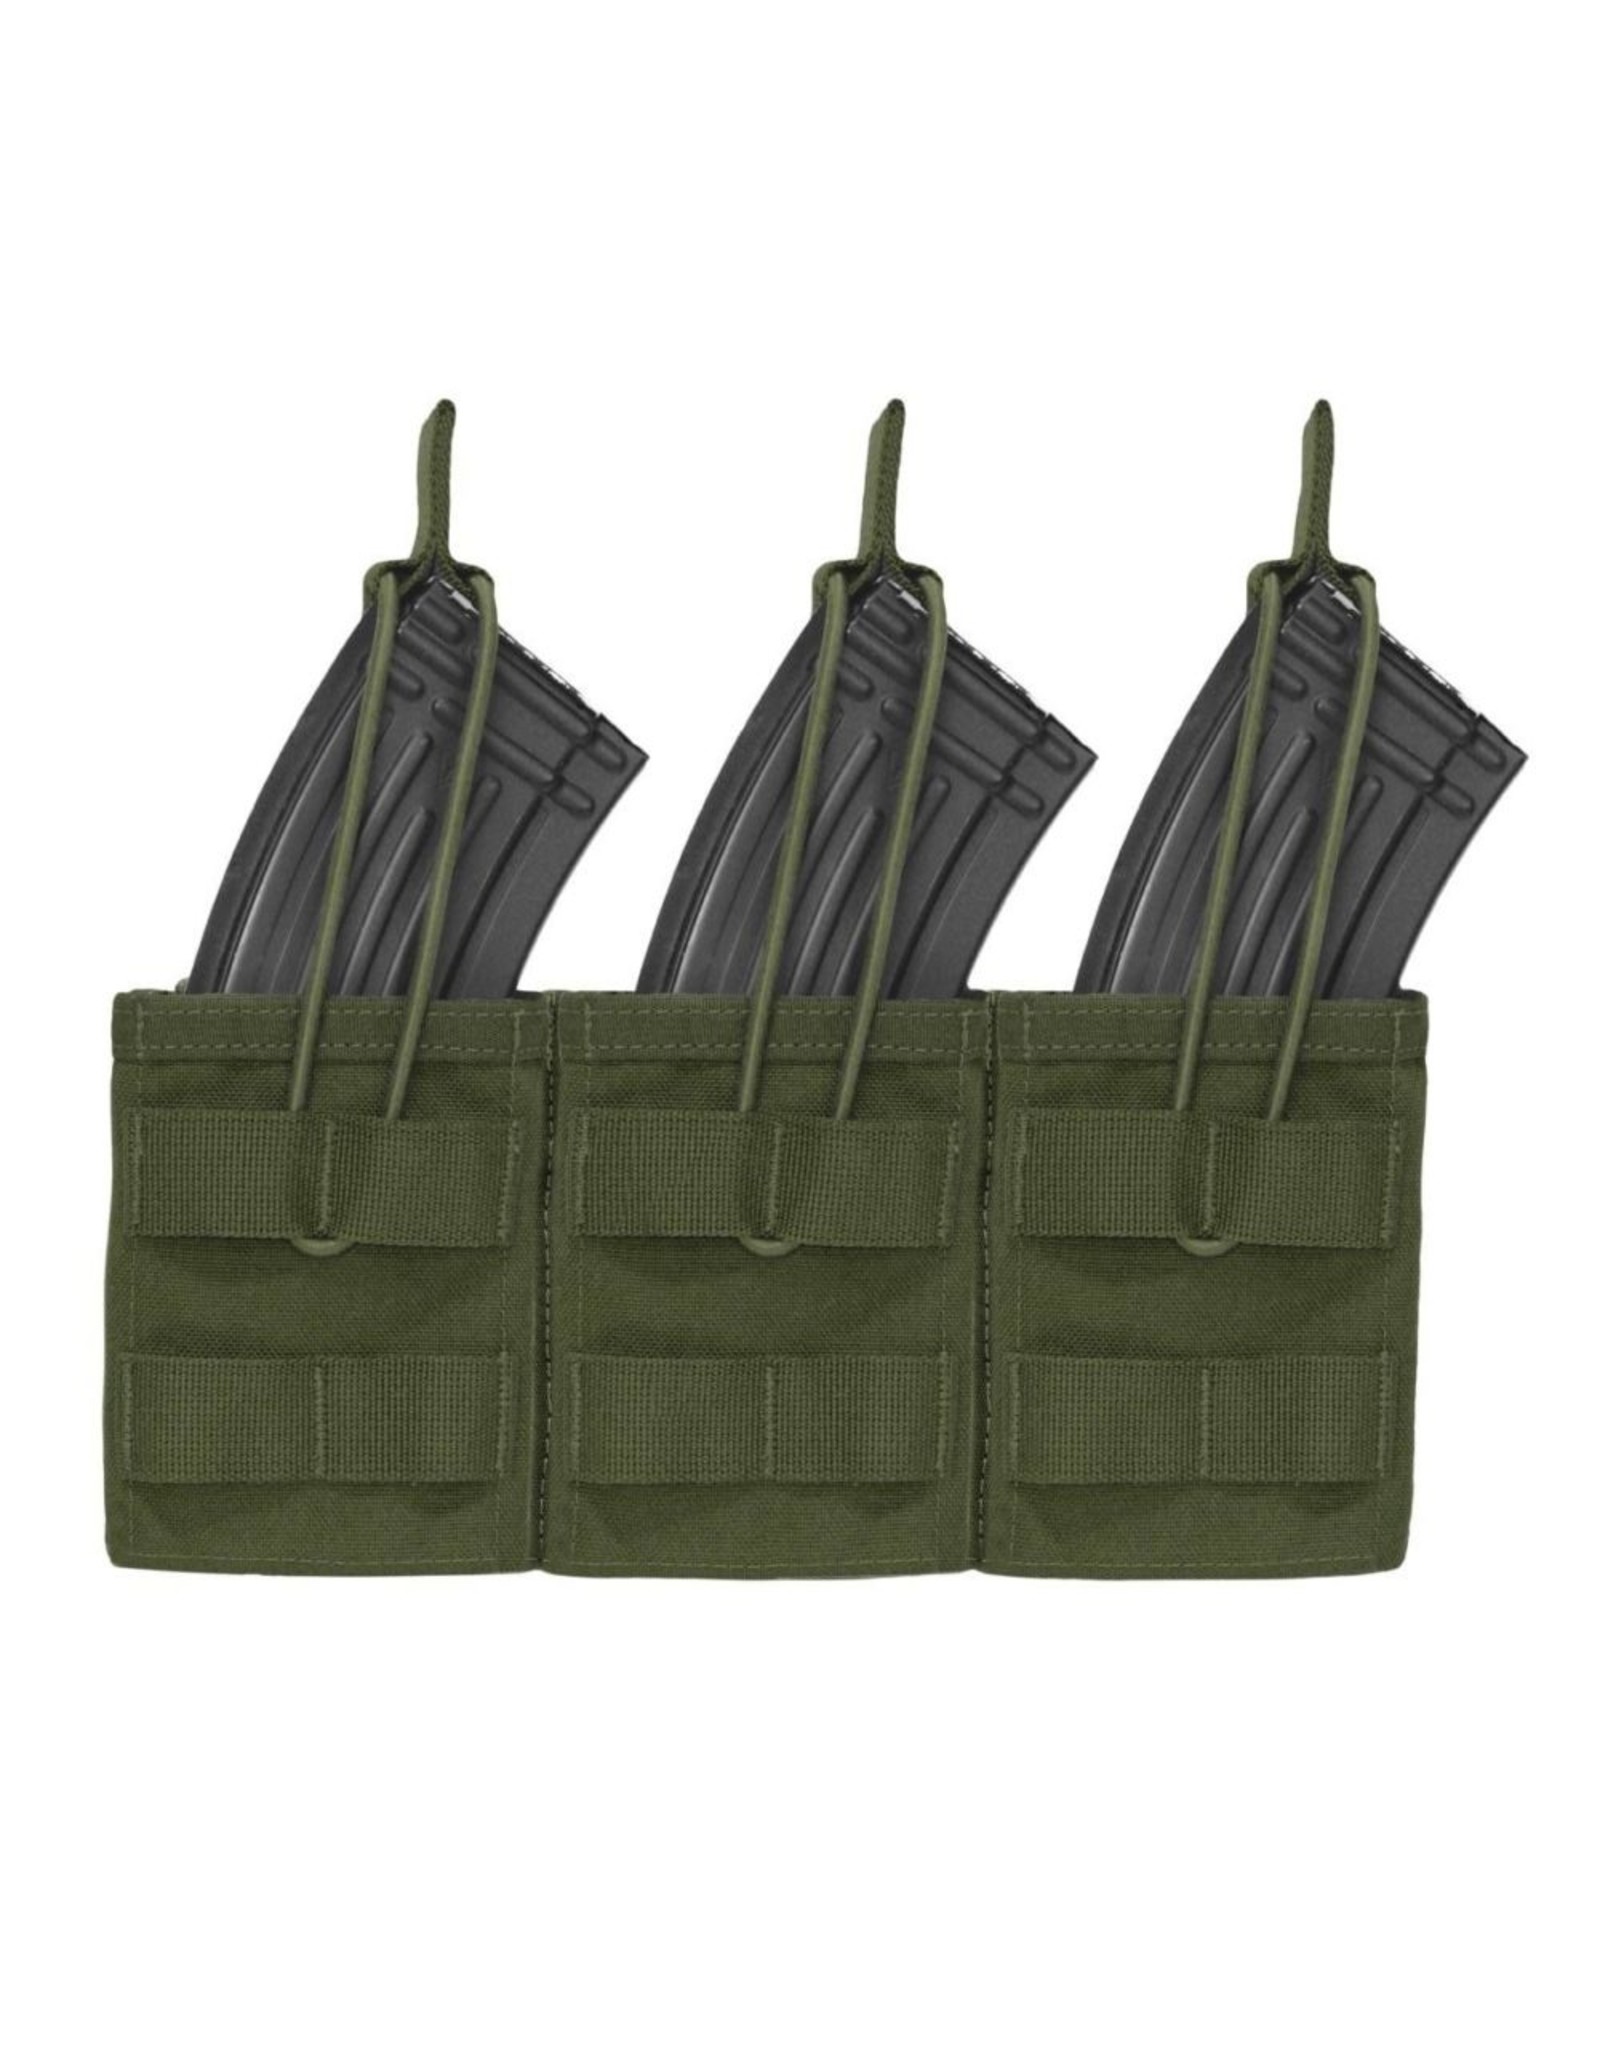 Warrior Triple Open AK 7.62 Mag Pouch - Olive Drab